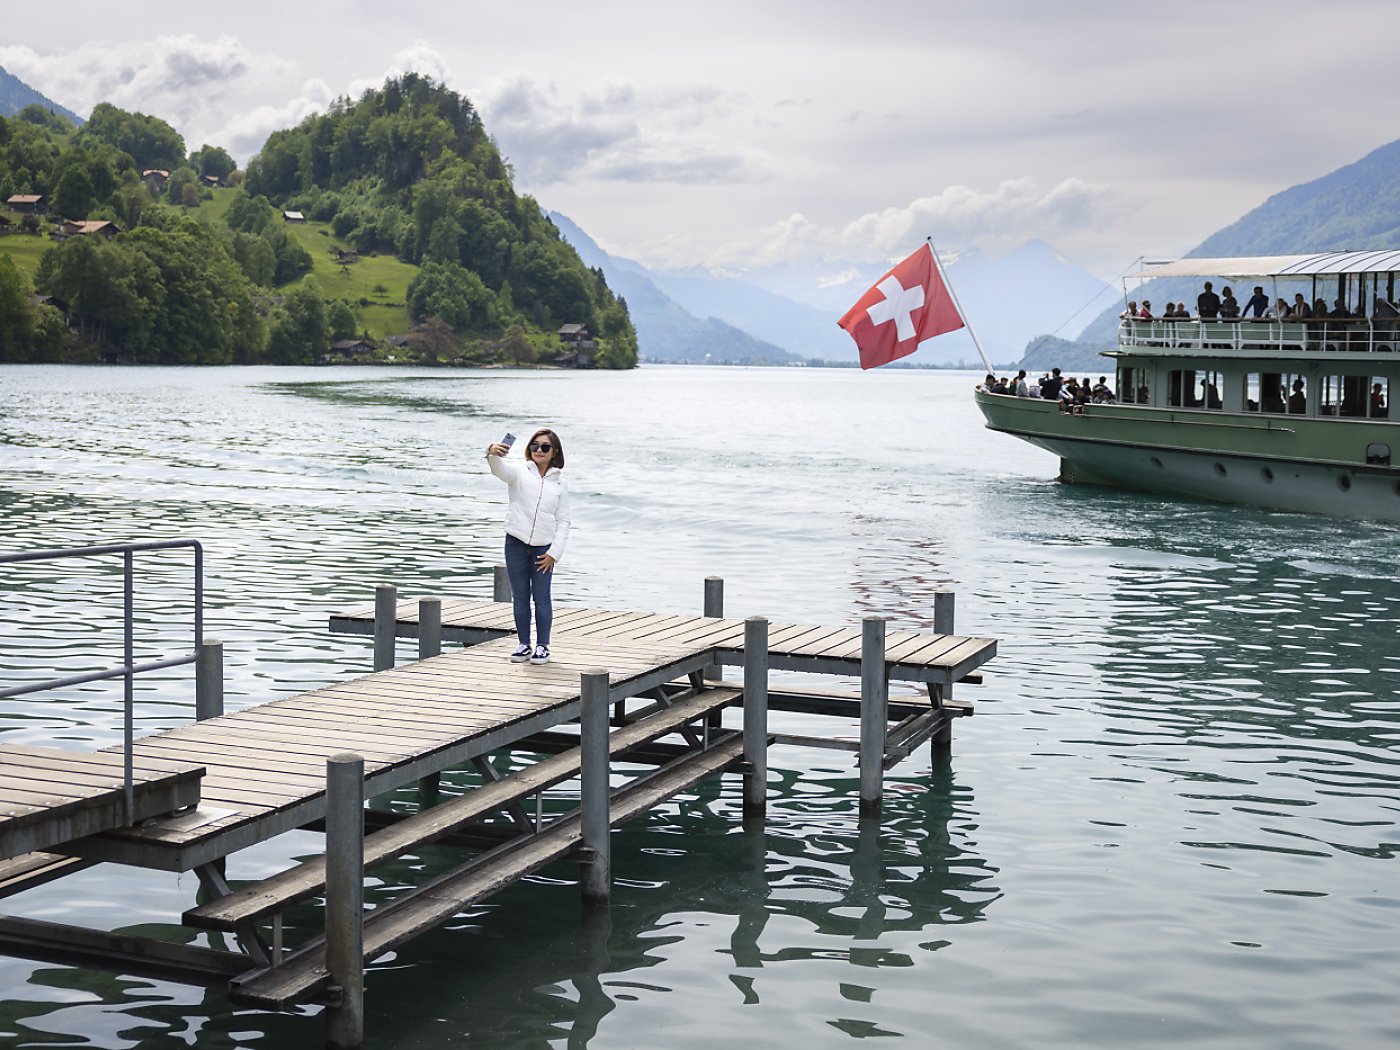 Only a few Swiss locations affected by overtourism